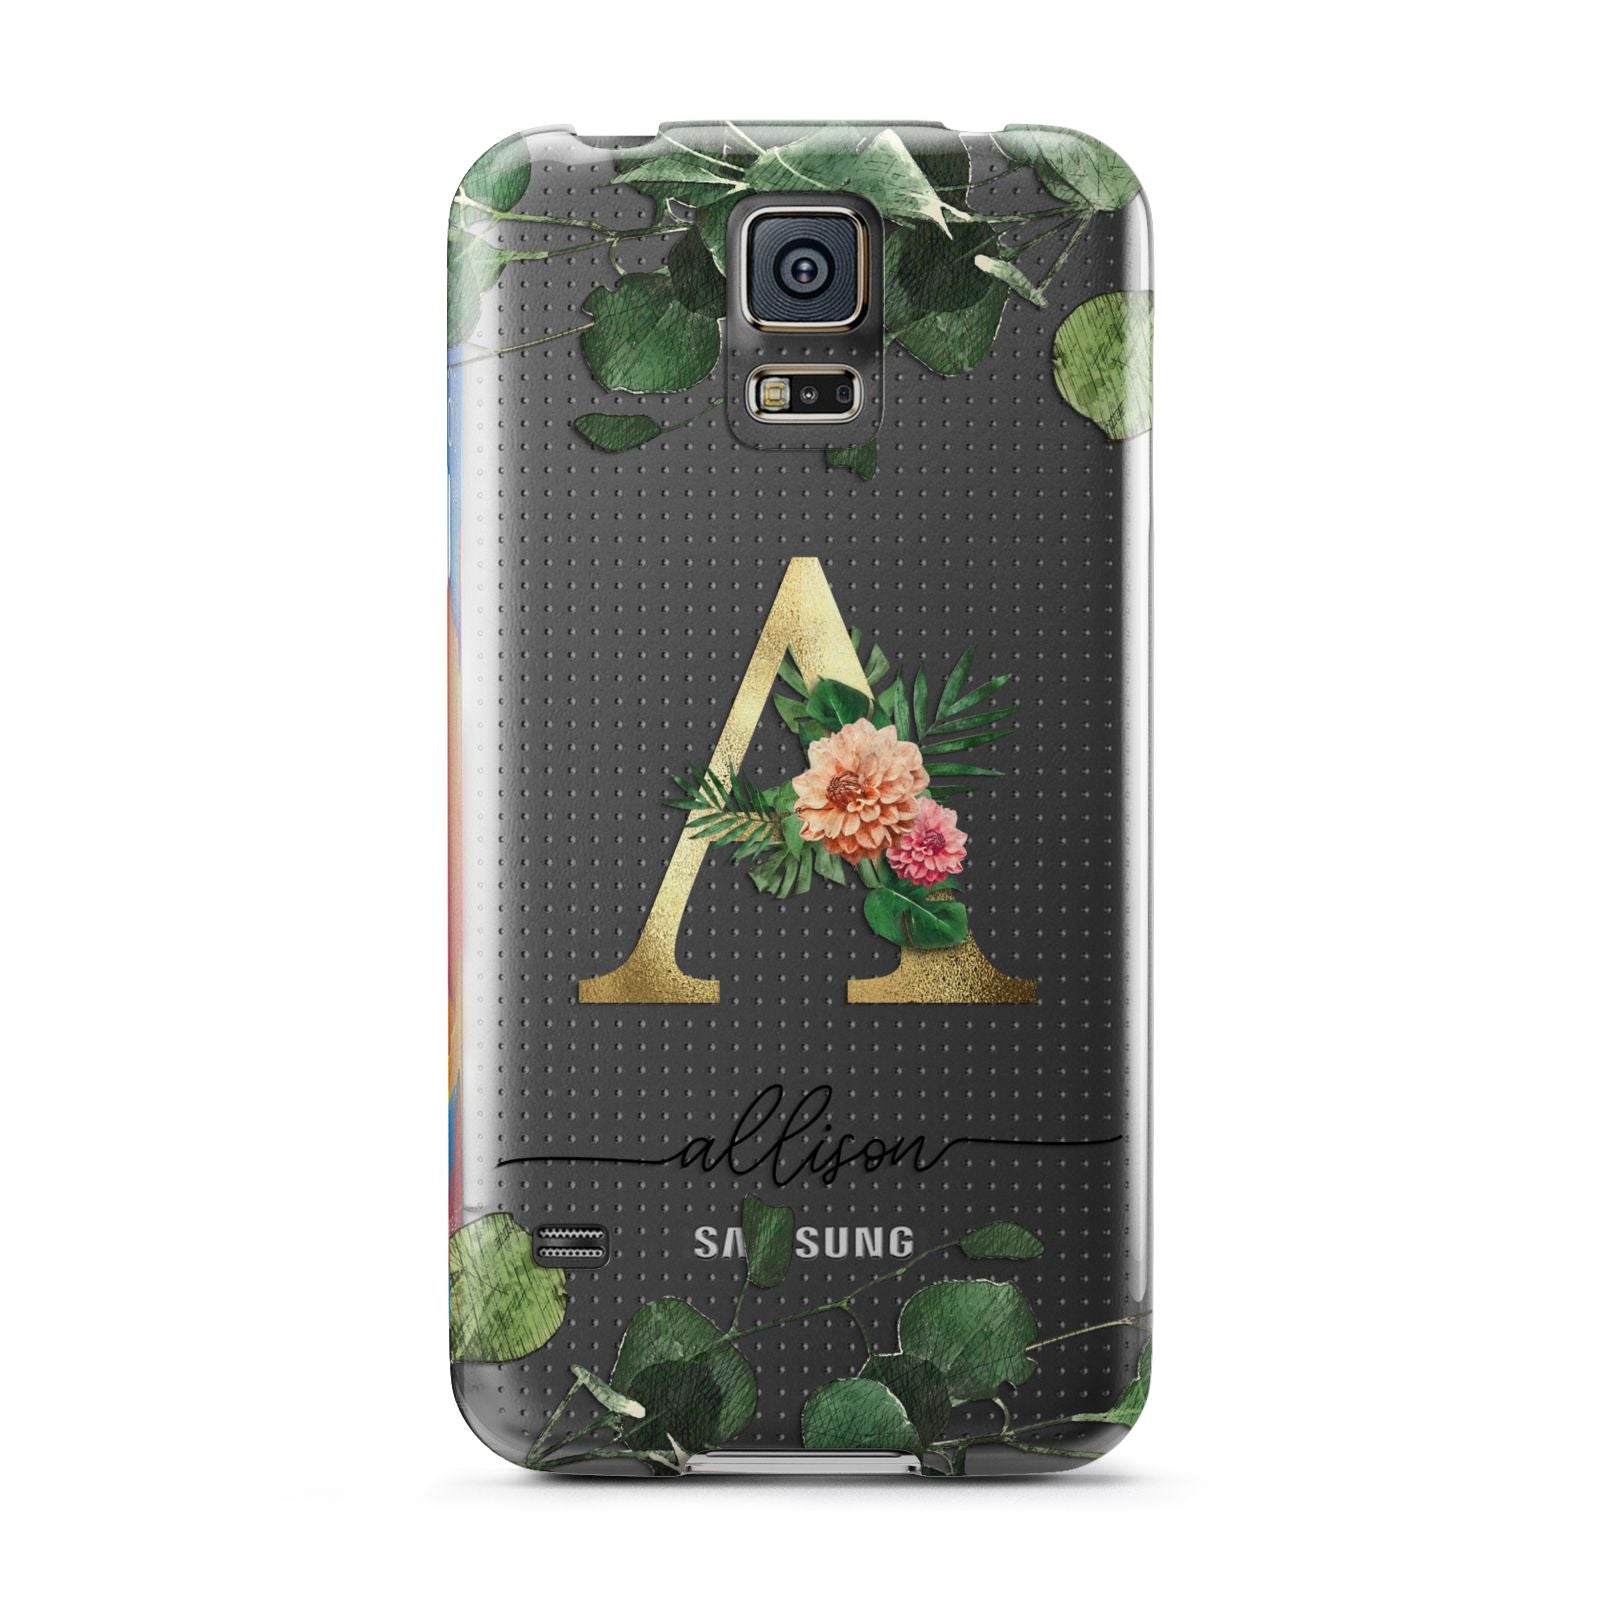 Personalised Forest Monogram Samsung Galaxy S5 Case